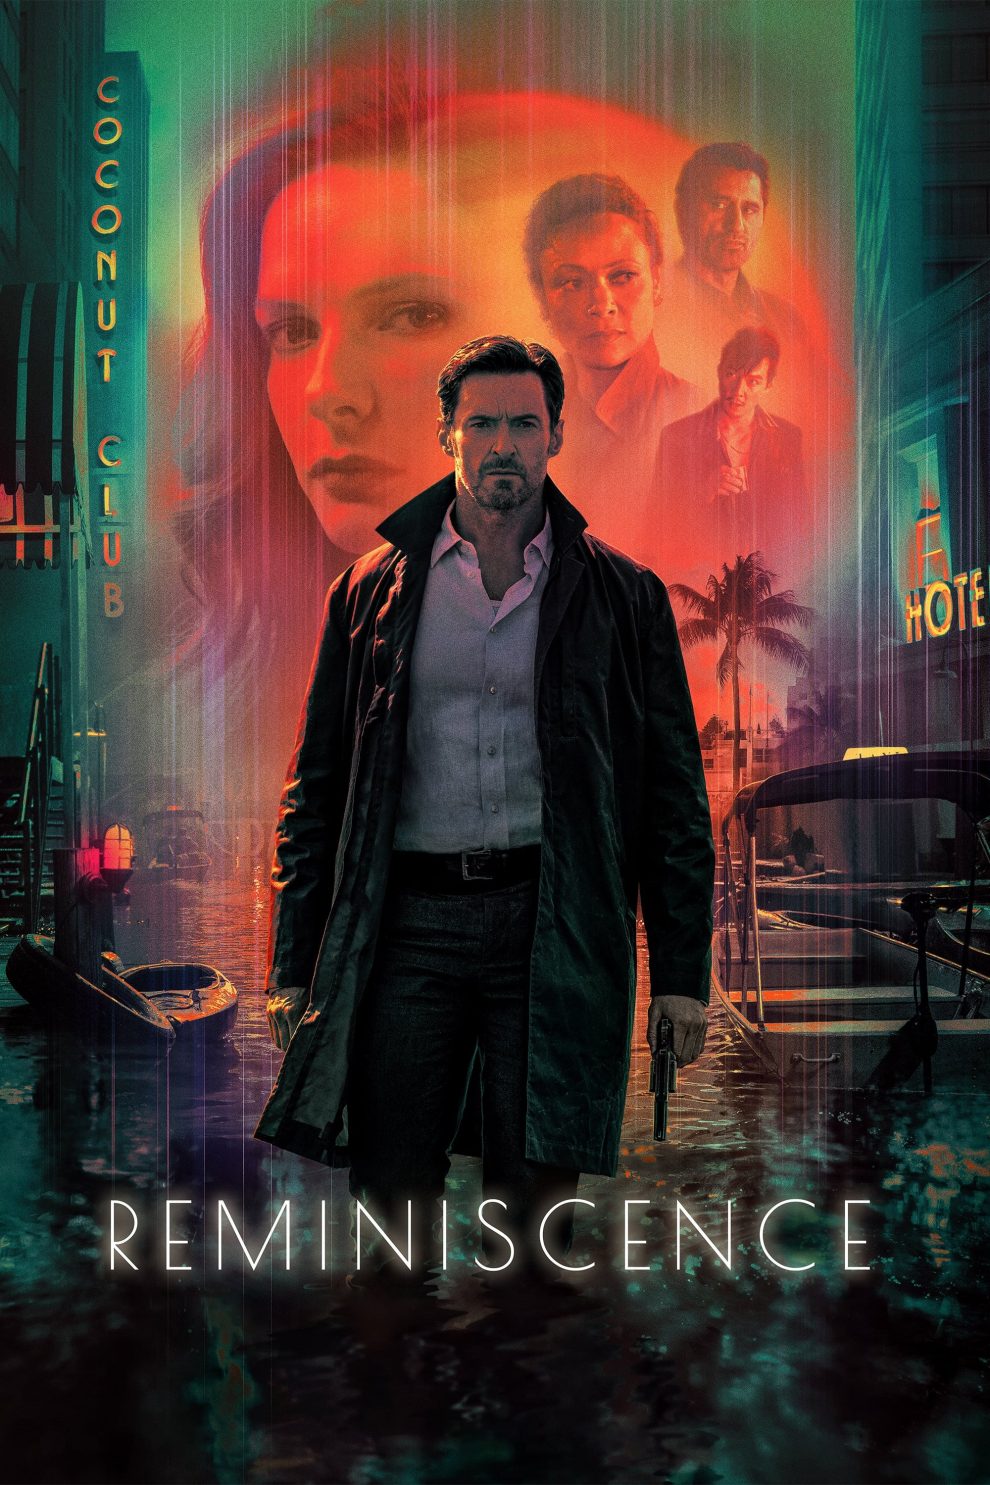 Poster for the movie "Reminiscence"